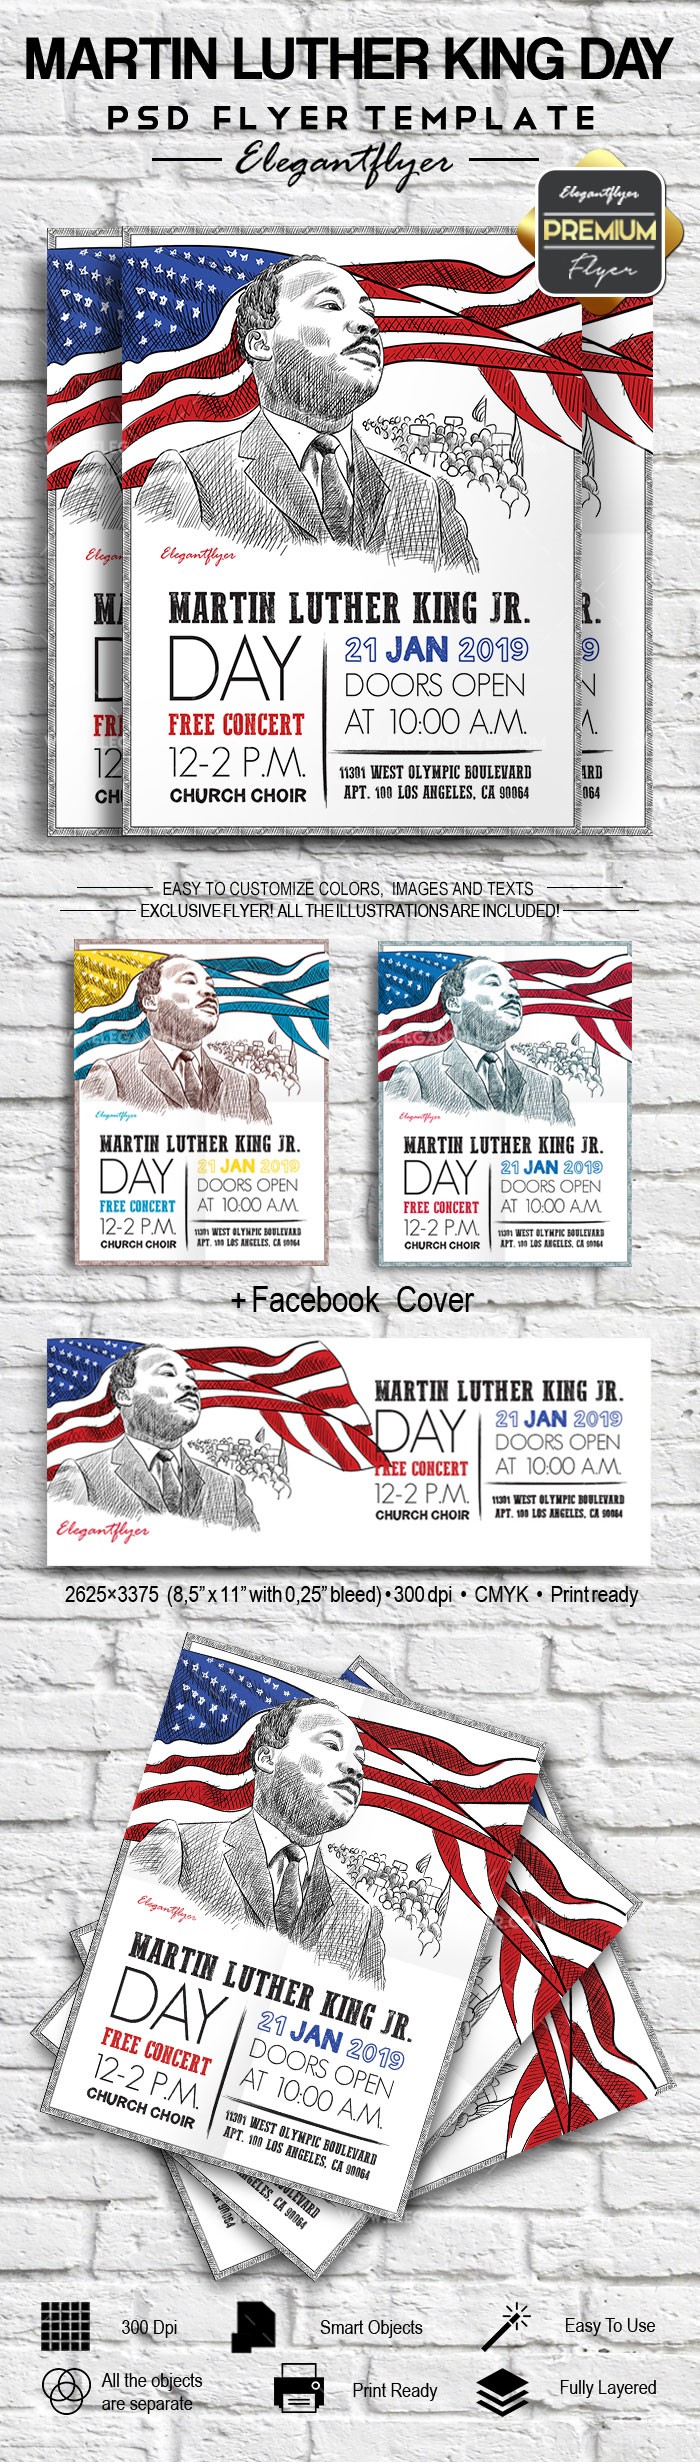 Martin Luther King Day by ElegantFlyer